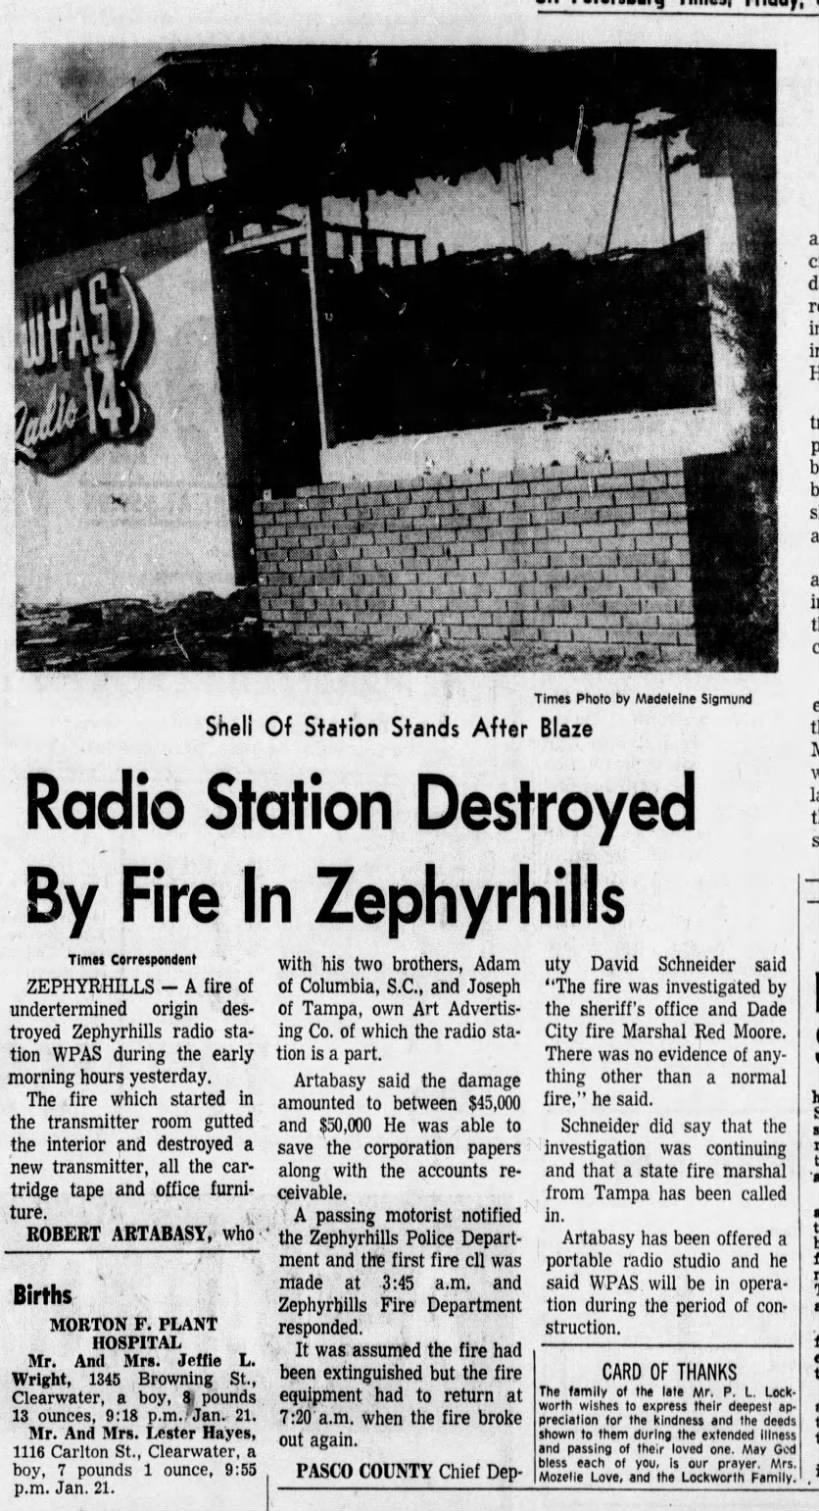 Radio Station Destroyed By Fire In Zephyrhills